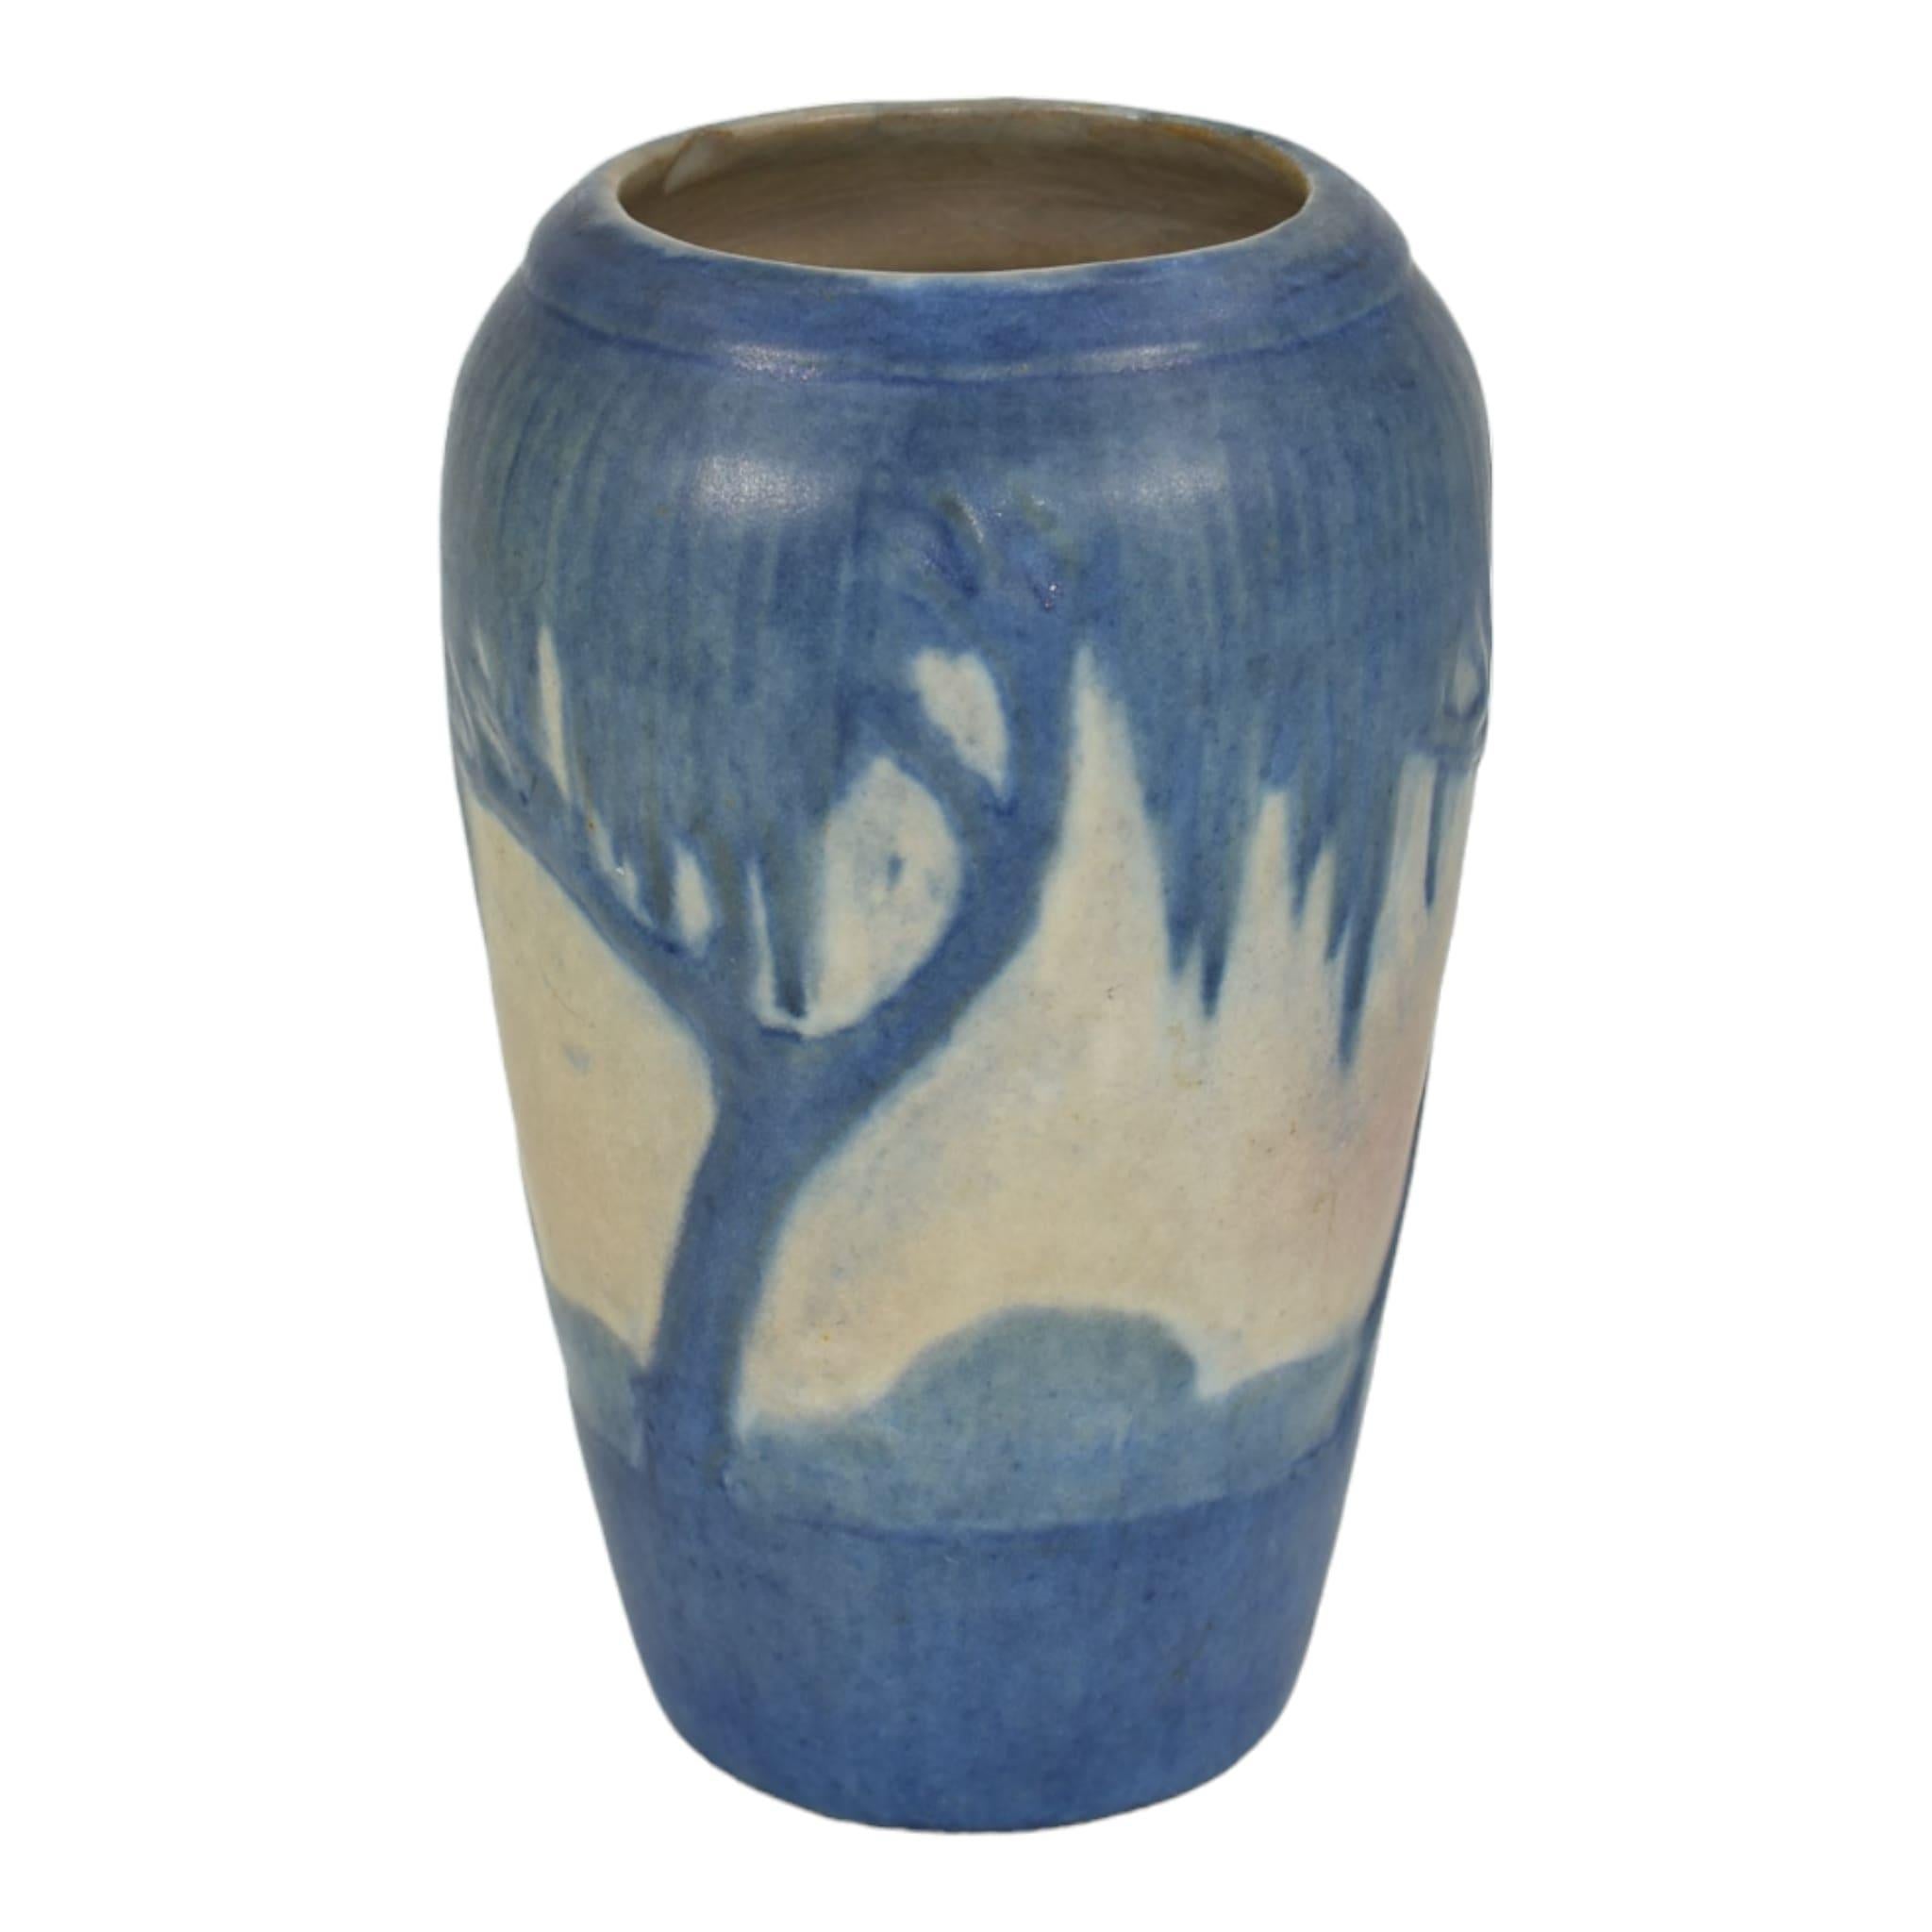 Newcomb College 1928 Art Pottery Twilight Scenic Moss Laden Trees Vase Irvine
Exceptional color and artwork with moss laden trees by Sadie Irvine in 1928. 
Excellent original condition. No chips, cracks, damage or repair of any kind. Slight factory